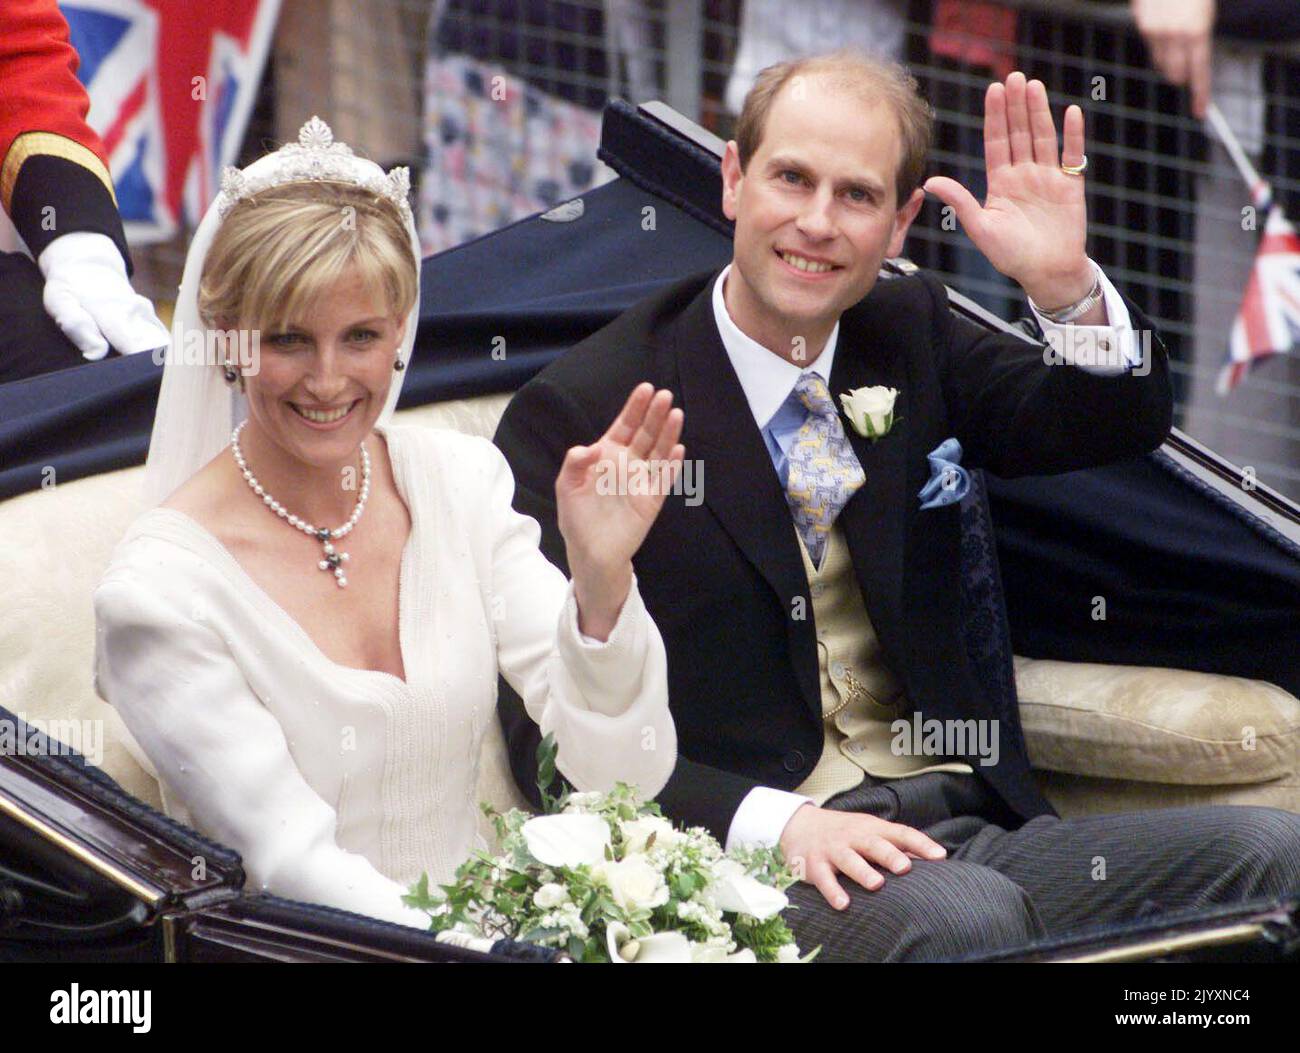 File photo dated 19/6/1999 of Prince Edward and Sophie Rhys-Jones - known as the Earl and Countess of Wessex after their wedding - waving to the crowds after their marriage at St George's Chapel in Windsor Castle. Issue date: Thursday September 8, 2022. Stock Photo